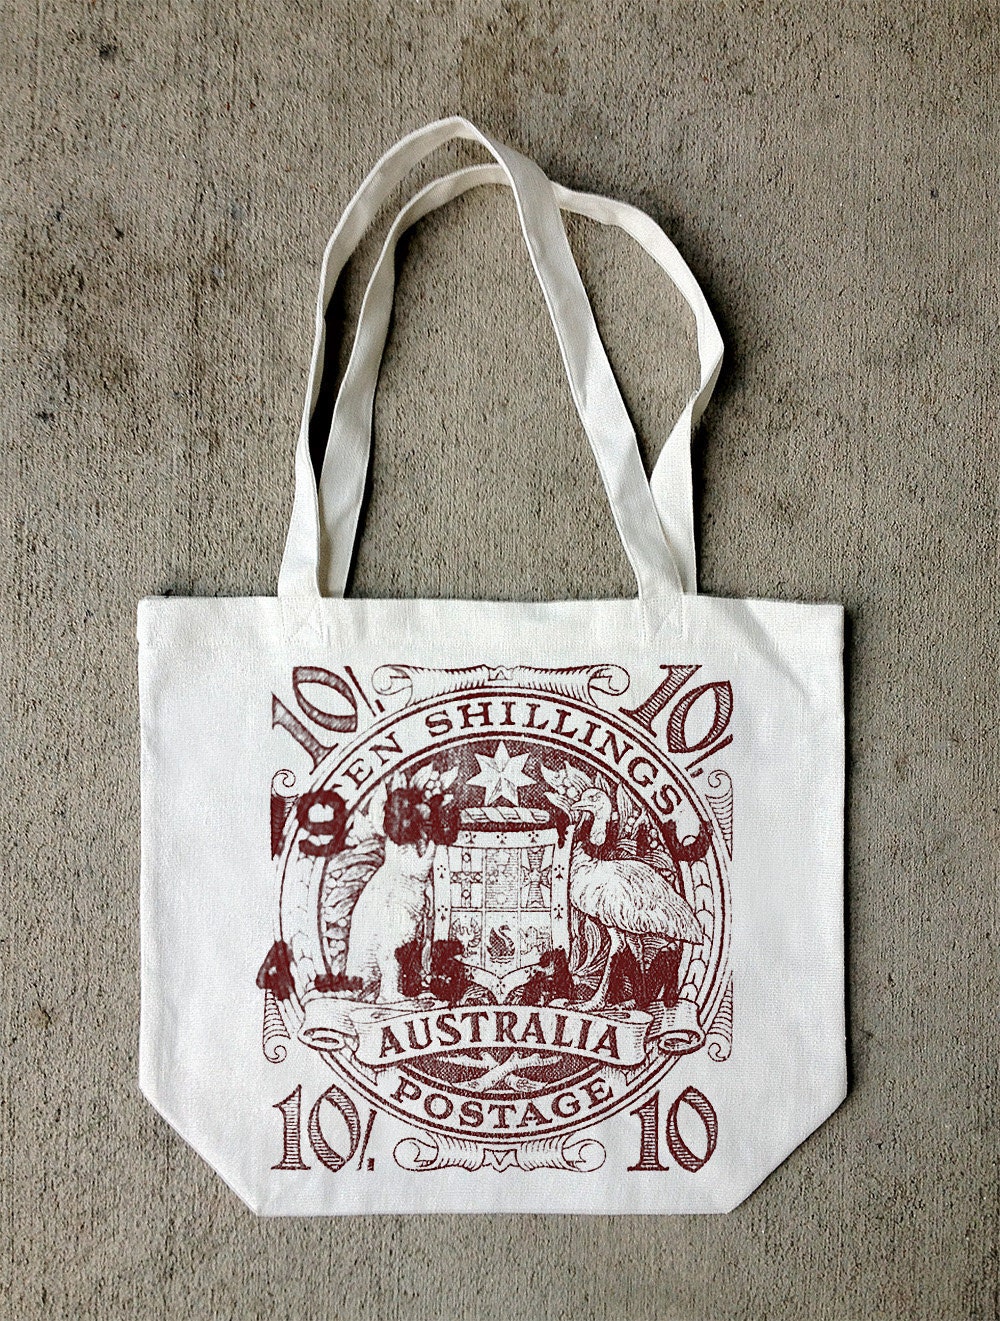 Australia 10 Shilling - Screen Printed Recycled Cotton Canvas Tote Bag - CrawlSpaceStudios